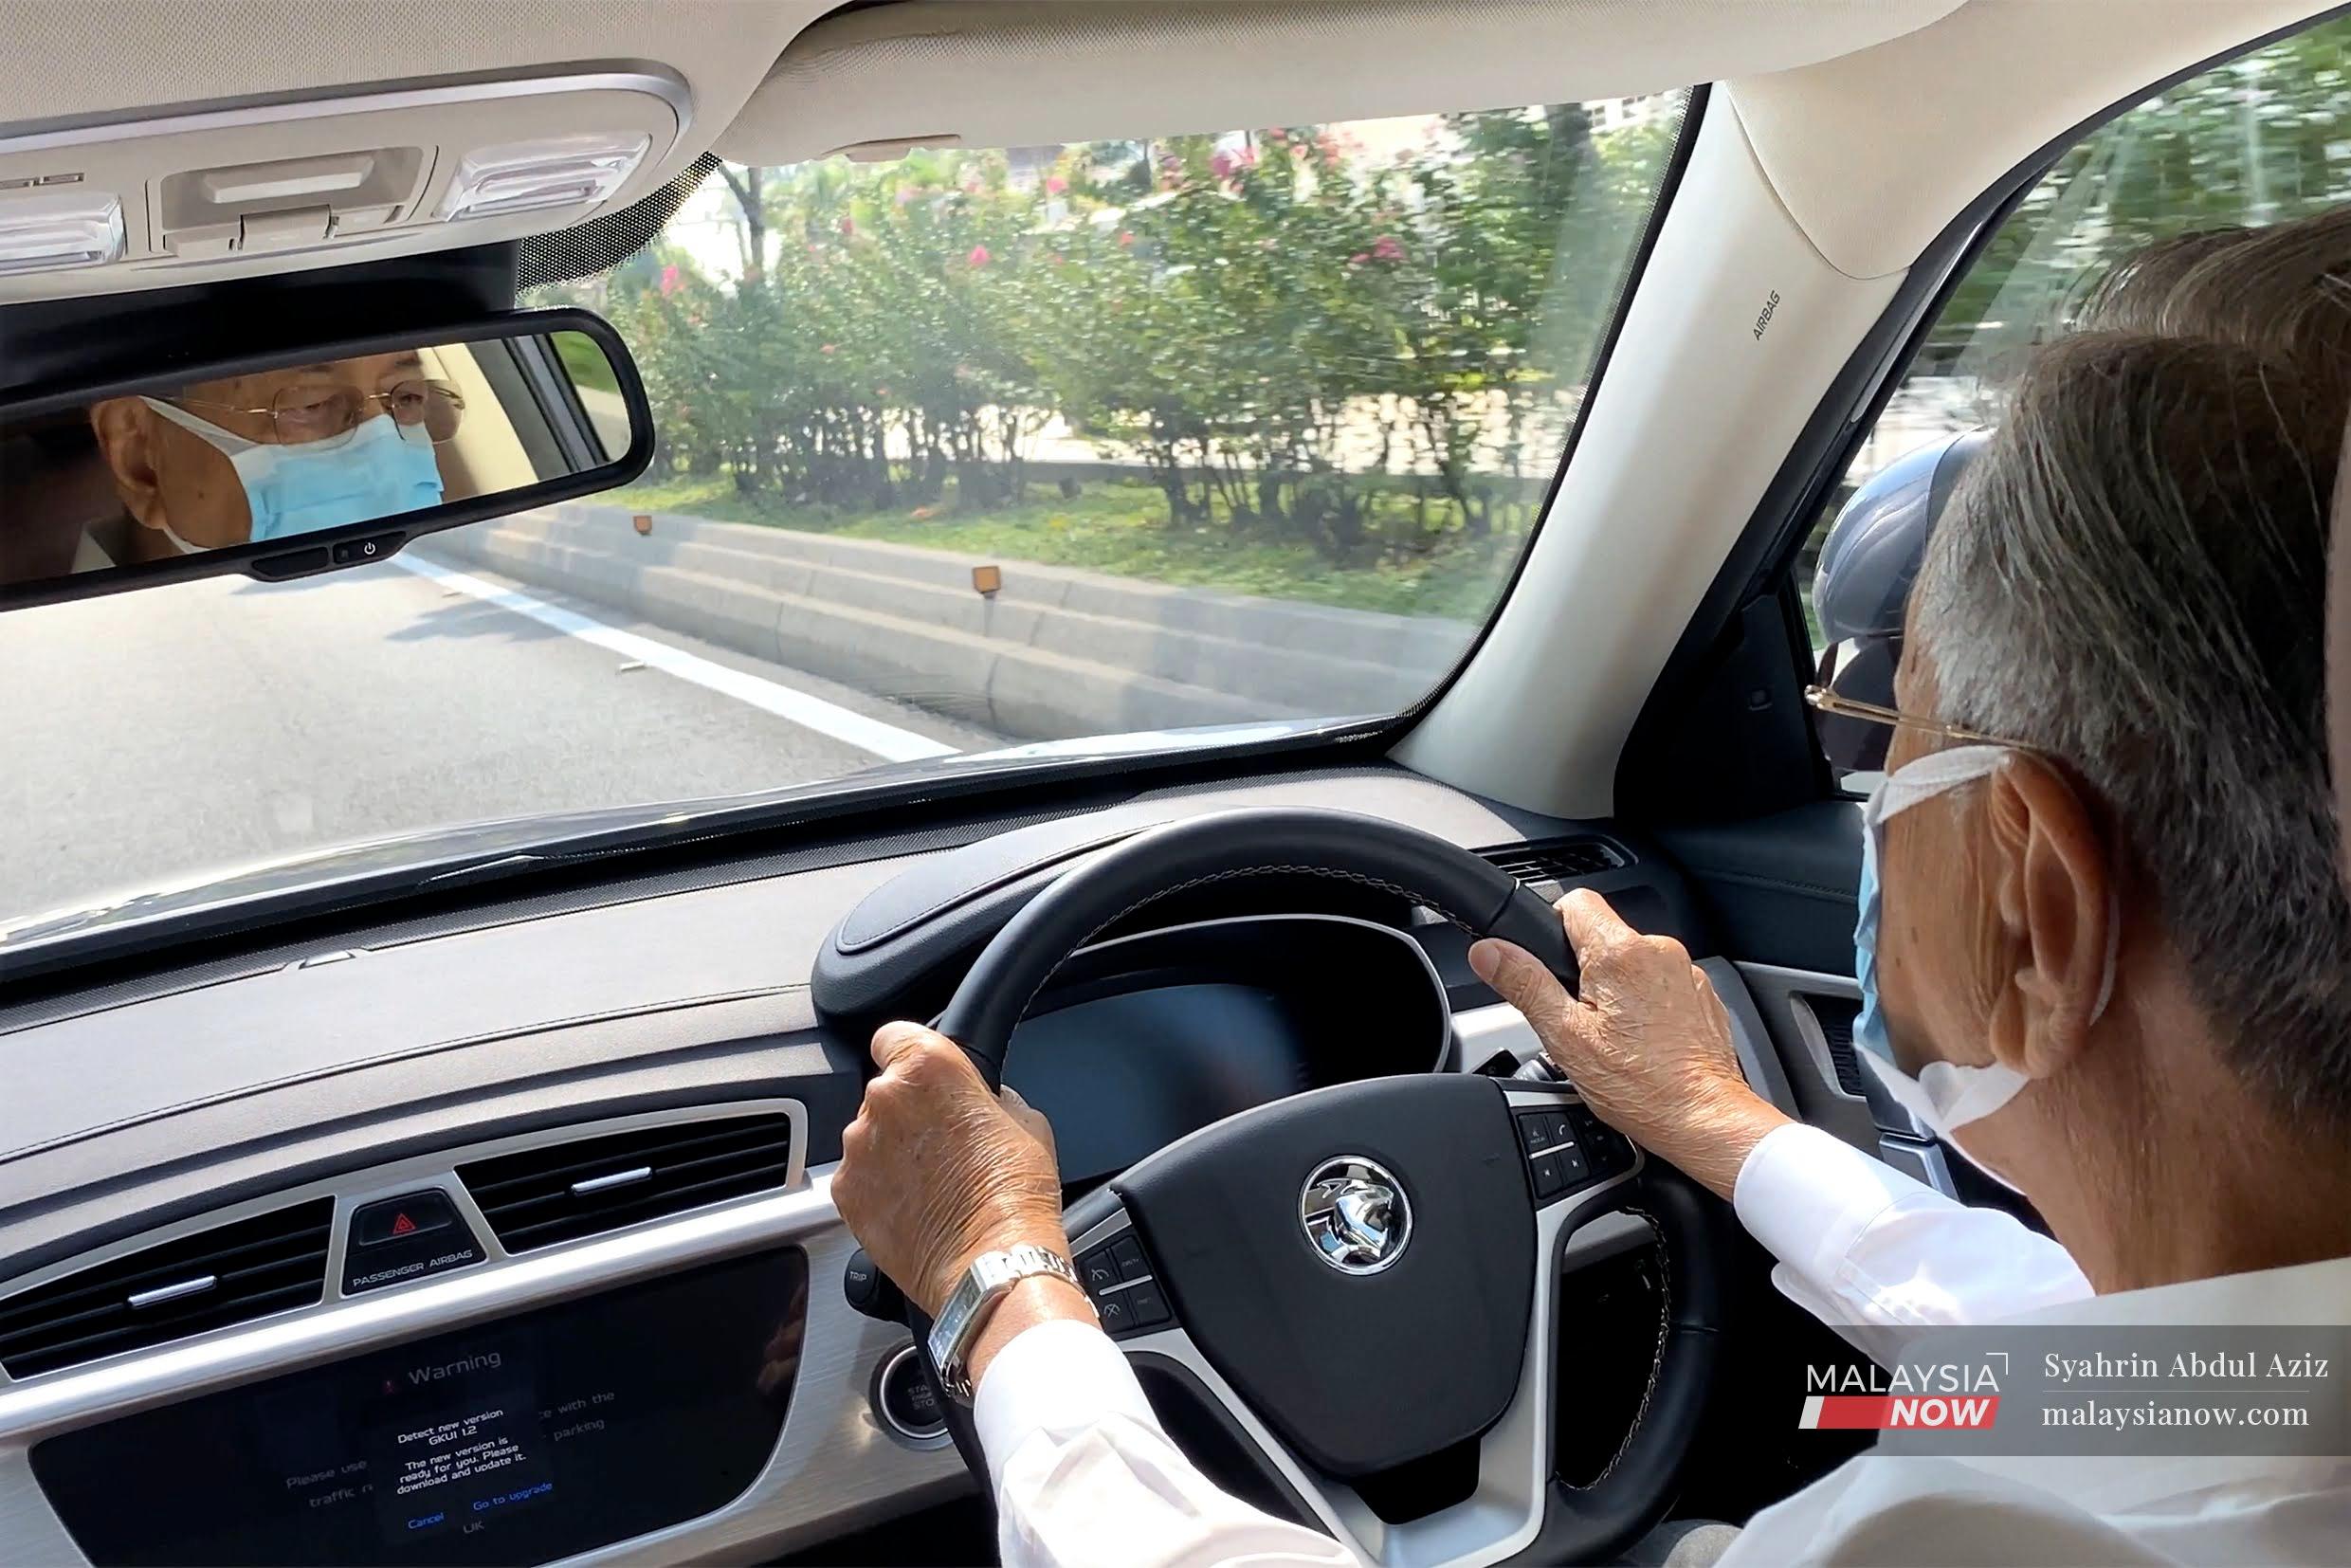 Former prime minister Dr Mahathir Mohamad takes MalaysiaNow on a spin around Kuala Lumpur, amid the ongoing debate about senior citizens on the road.